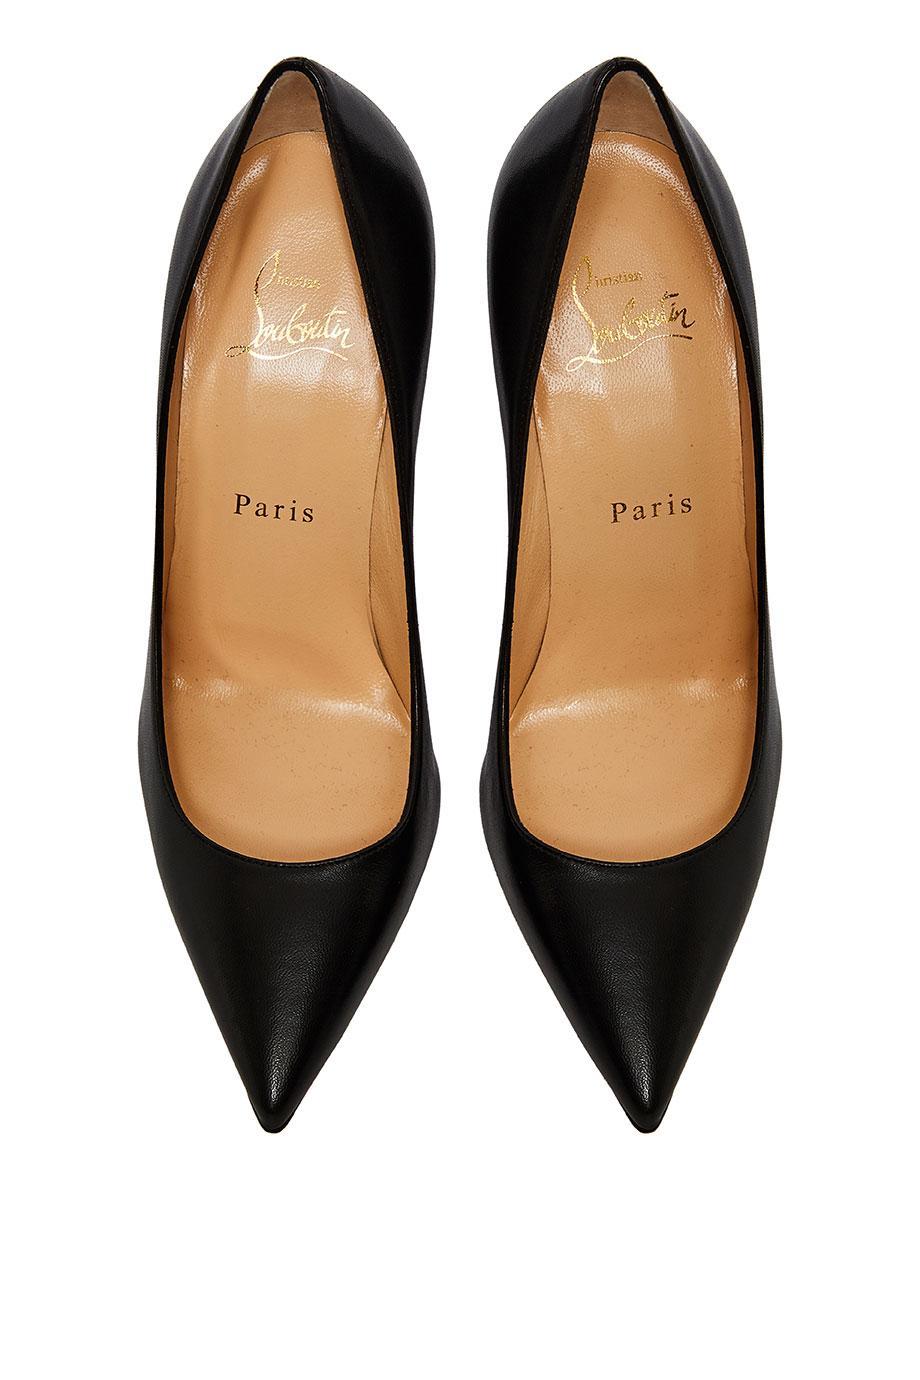 Kate leather pumps